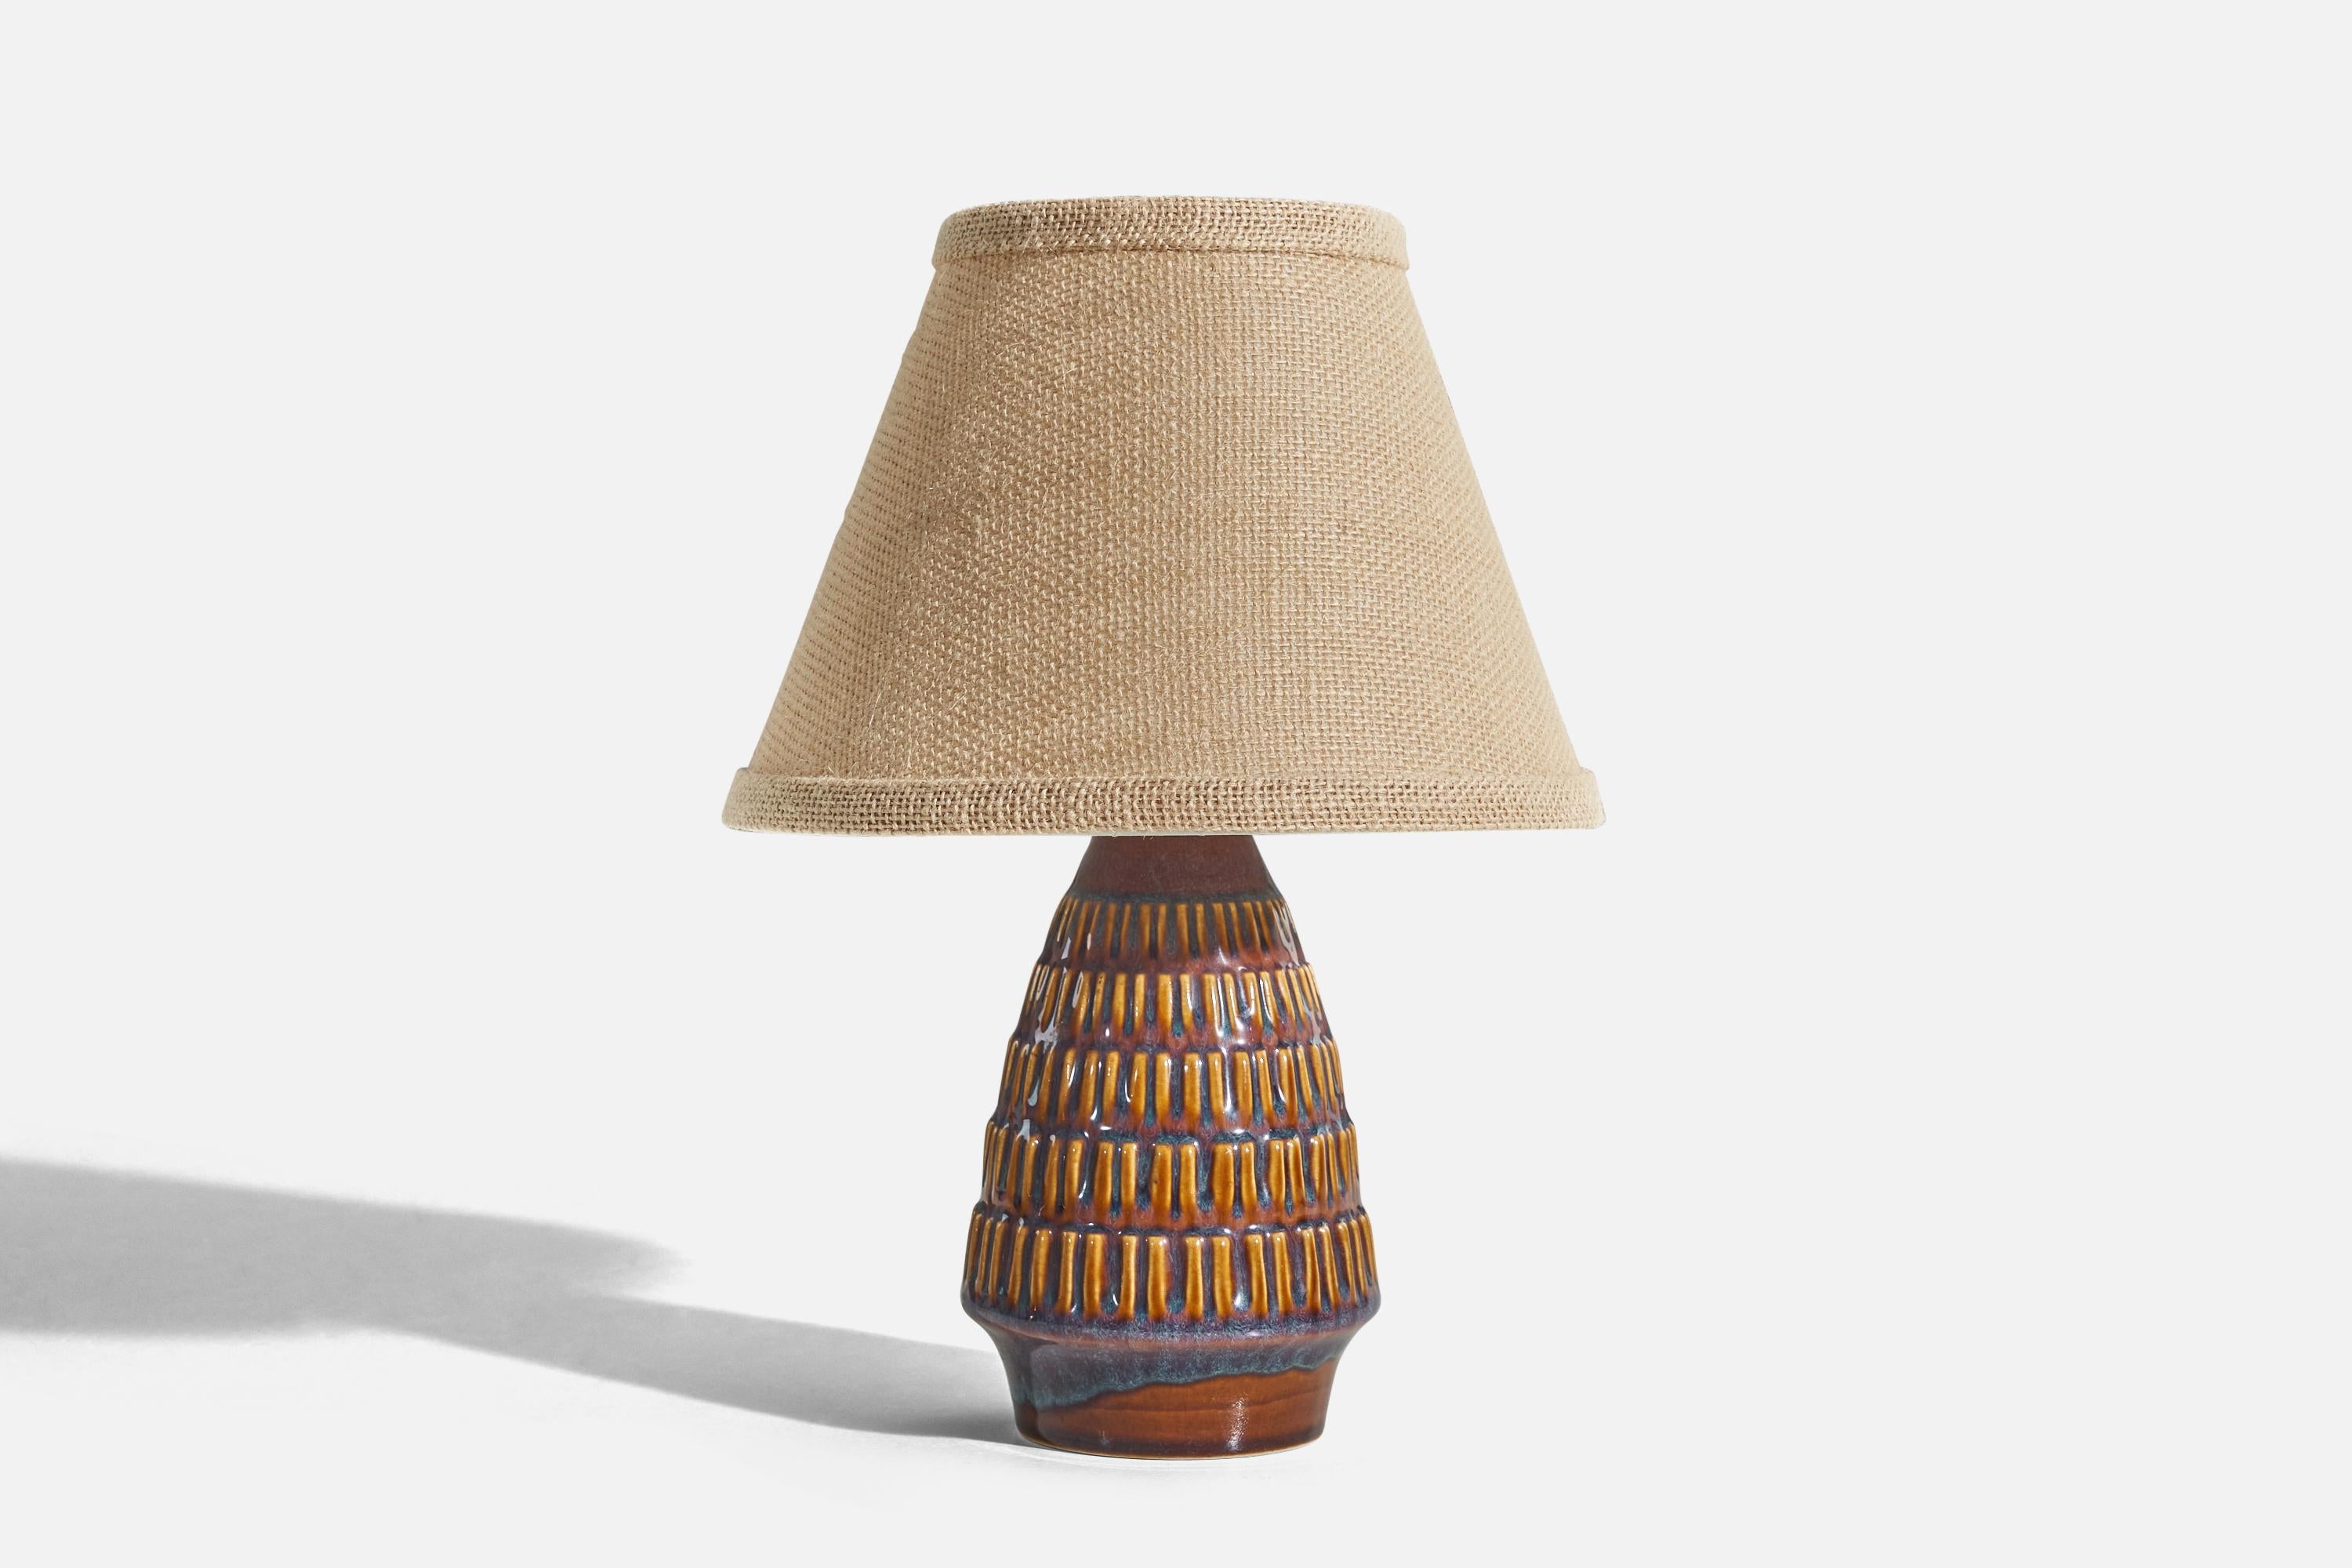 A blue, yellow and brown, glazed stoneware table lamp designed and produced by Søholm Stentøj, Denmark, c. 1960s.

Sold without lampshade. 
Dimensions of lamp (inches) : 8.56 x 4 x 4 (H x W x D)
Dimensions of shade (inches) : 4.25 x 8.25 x 6 (T